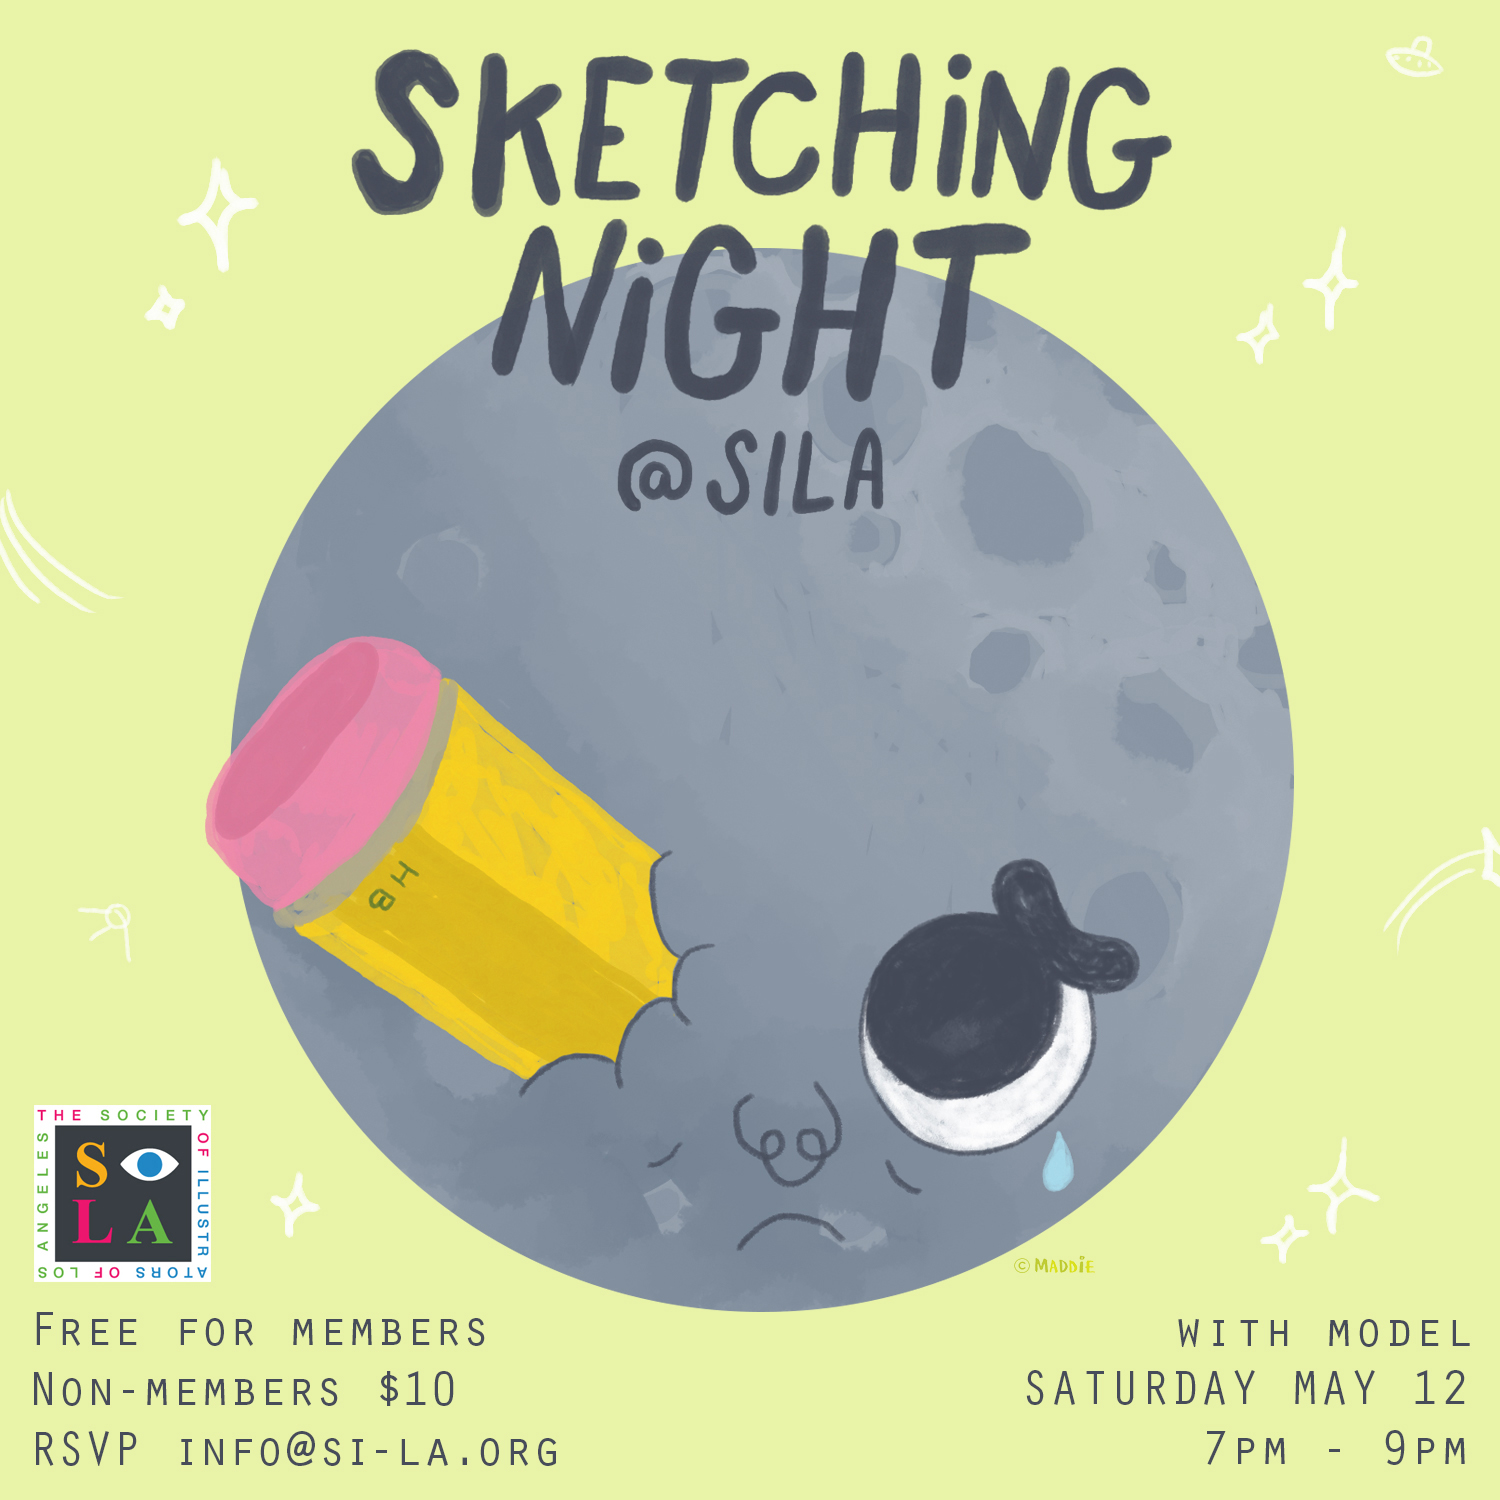 Our First Sketching Night for 2018! Saturday May 12, 7pm – 9pm